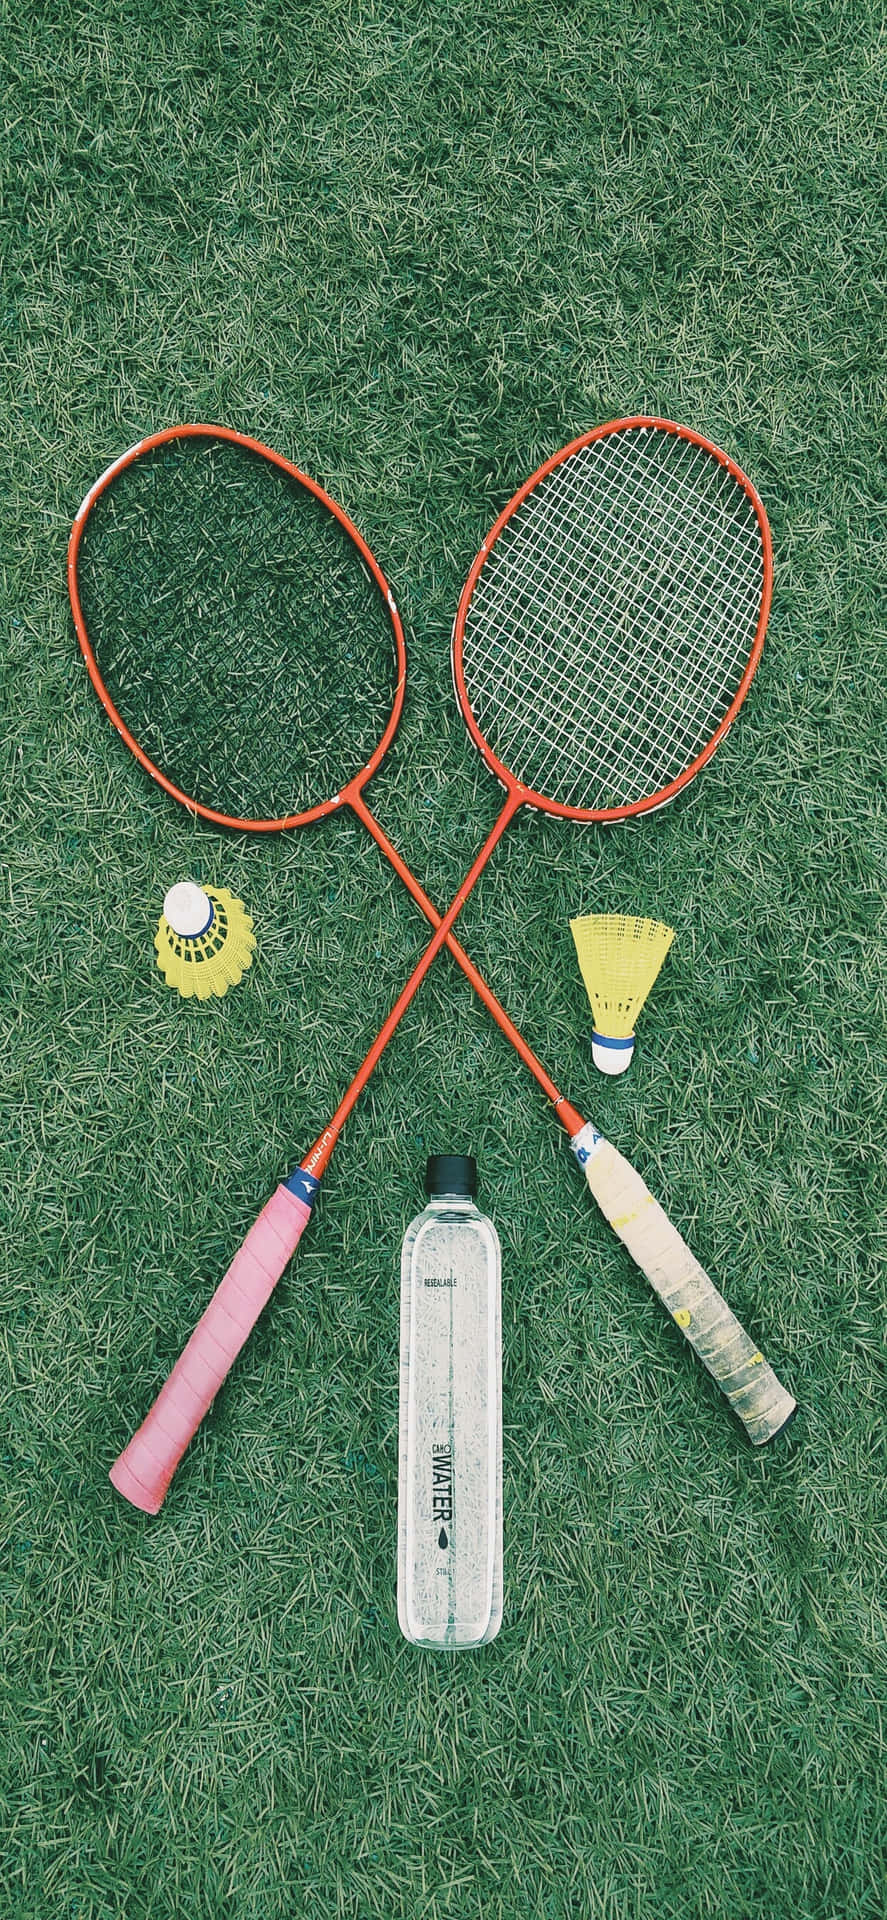 Stay Active with the Iphone Xs Max and Badminton.